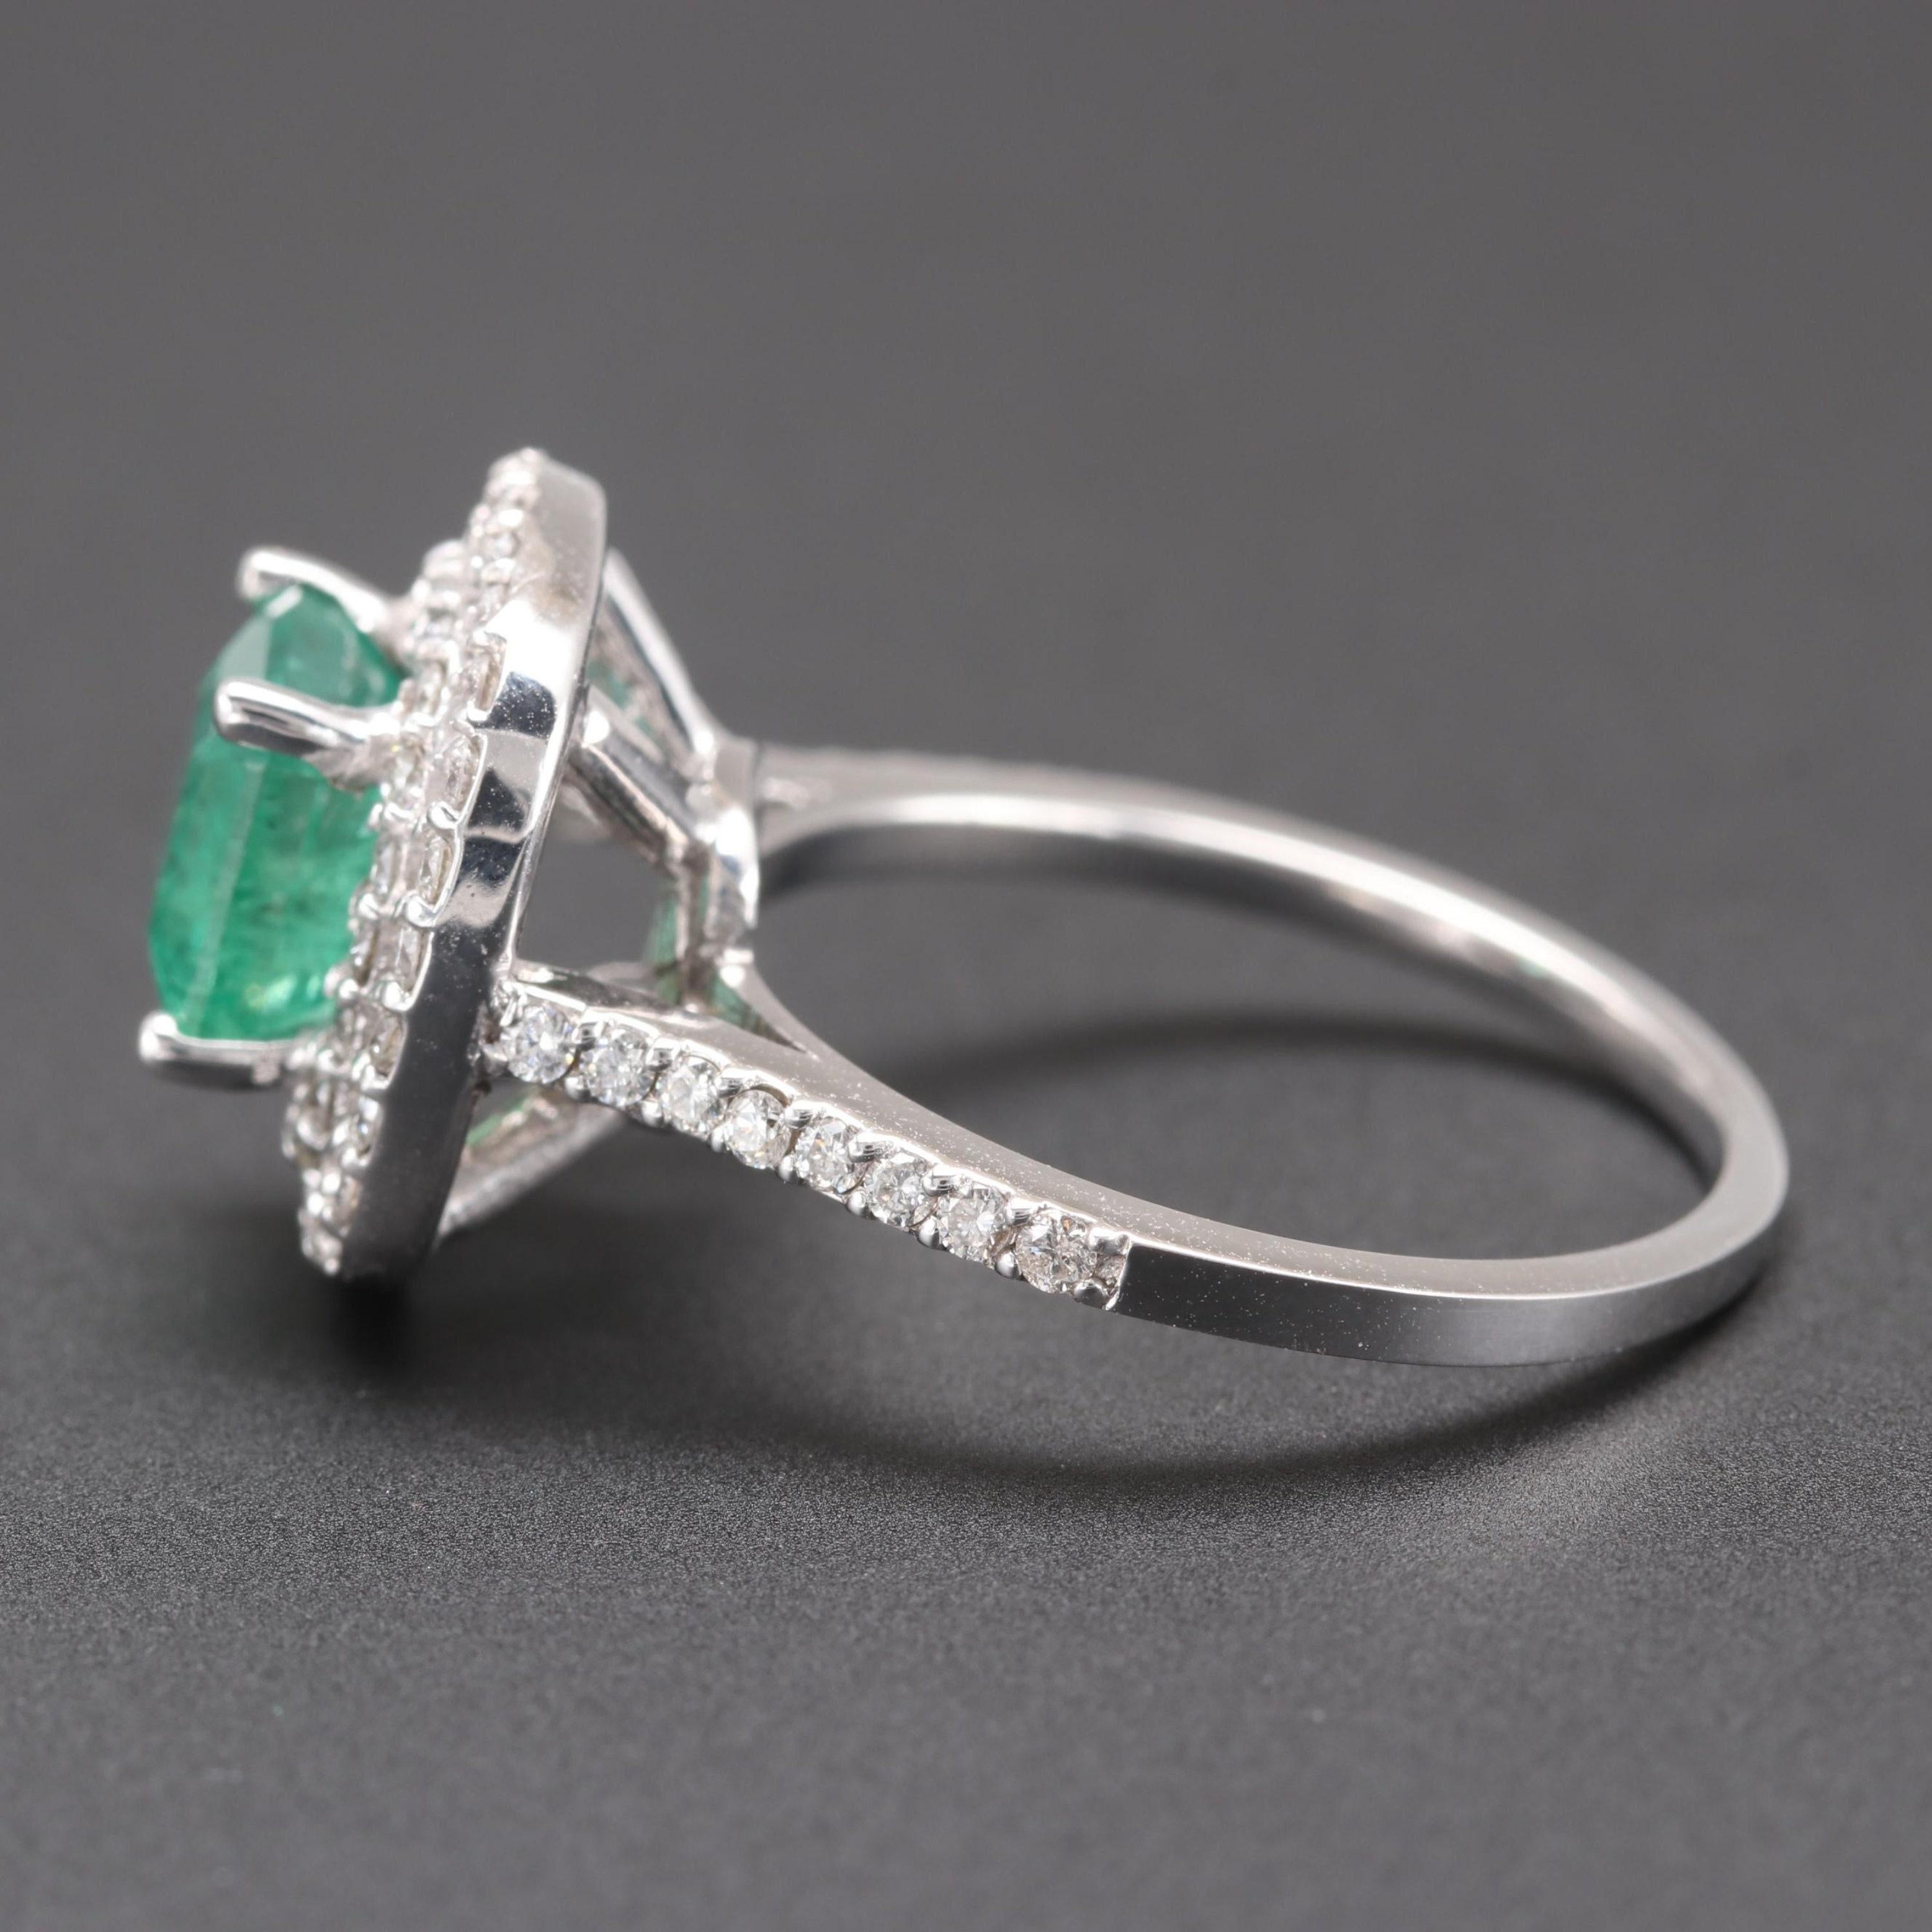 For Sale:  Art Deco Natural Emerald Diamond Engagement Ring Set in 18K Gold, Cocktail Ring 5